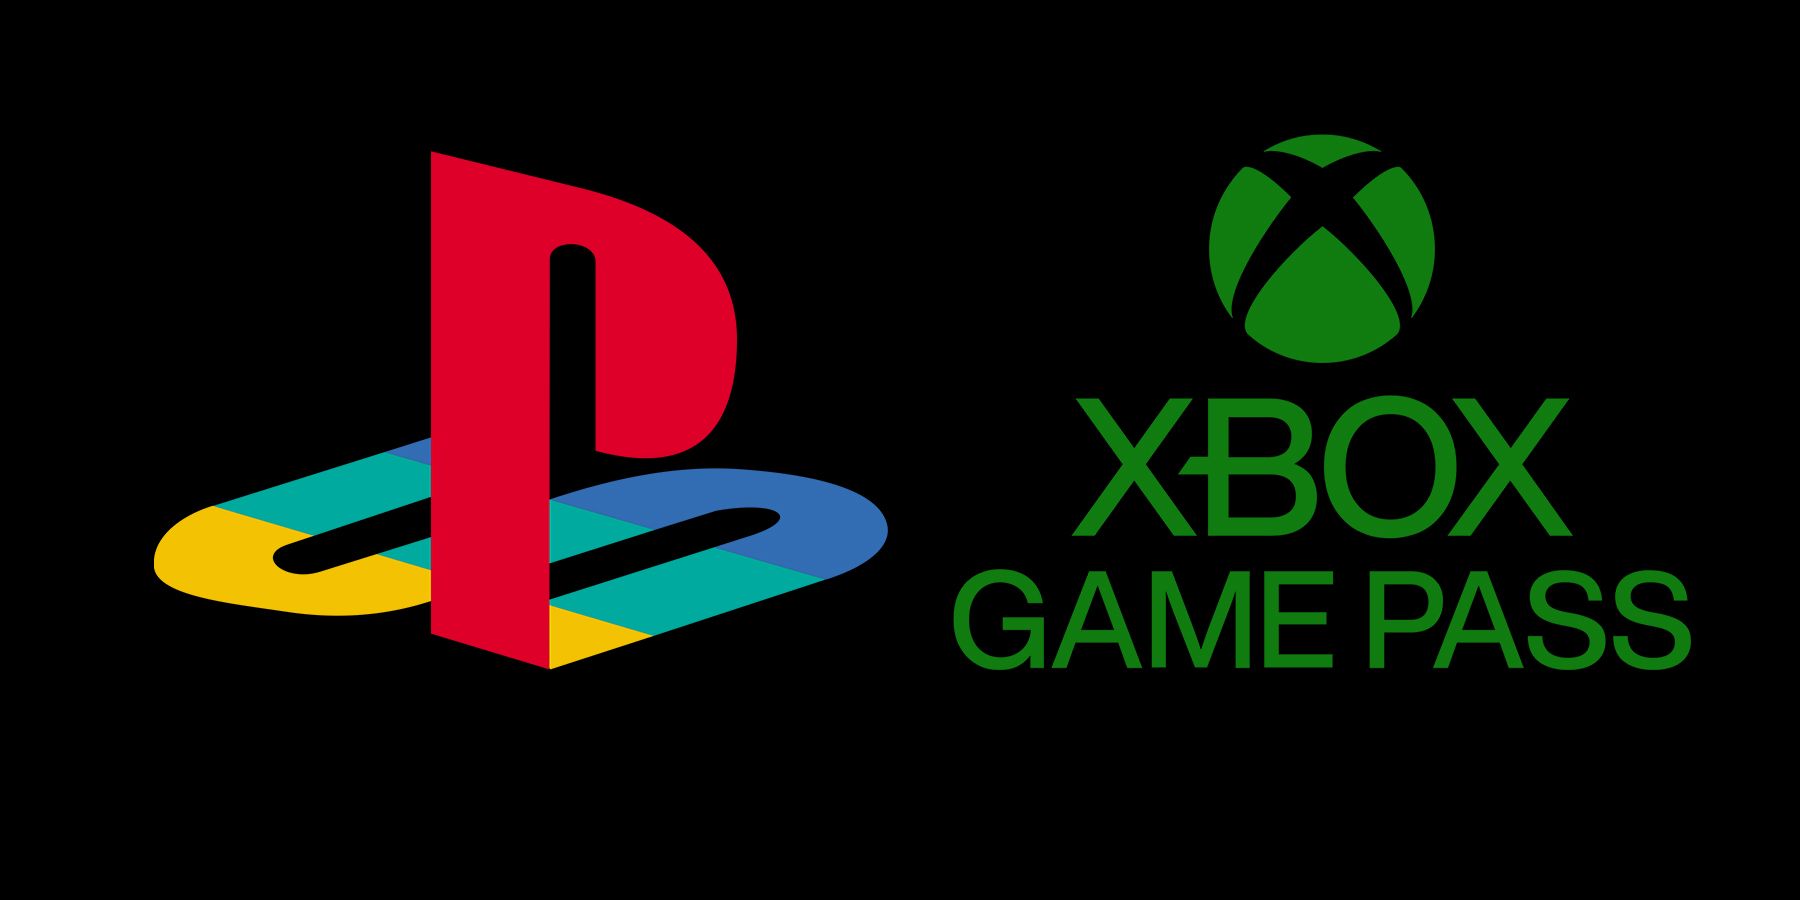 PlayStation Reportedly Planning Xbox Game Pass Competitor With PS1, PS2,  PSP Games